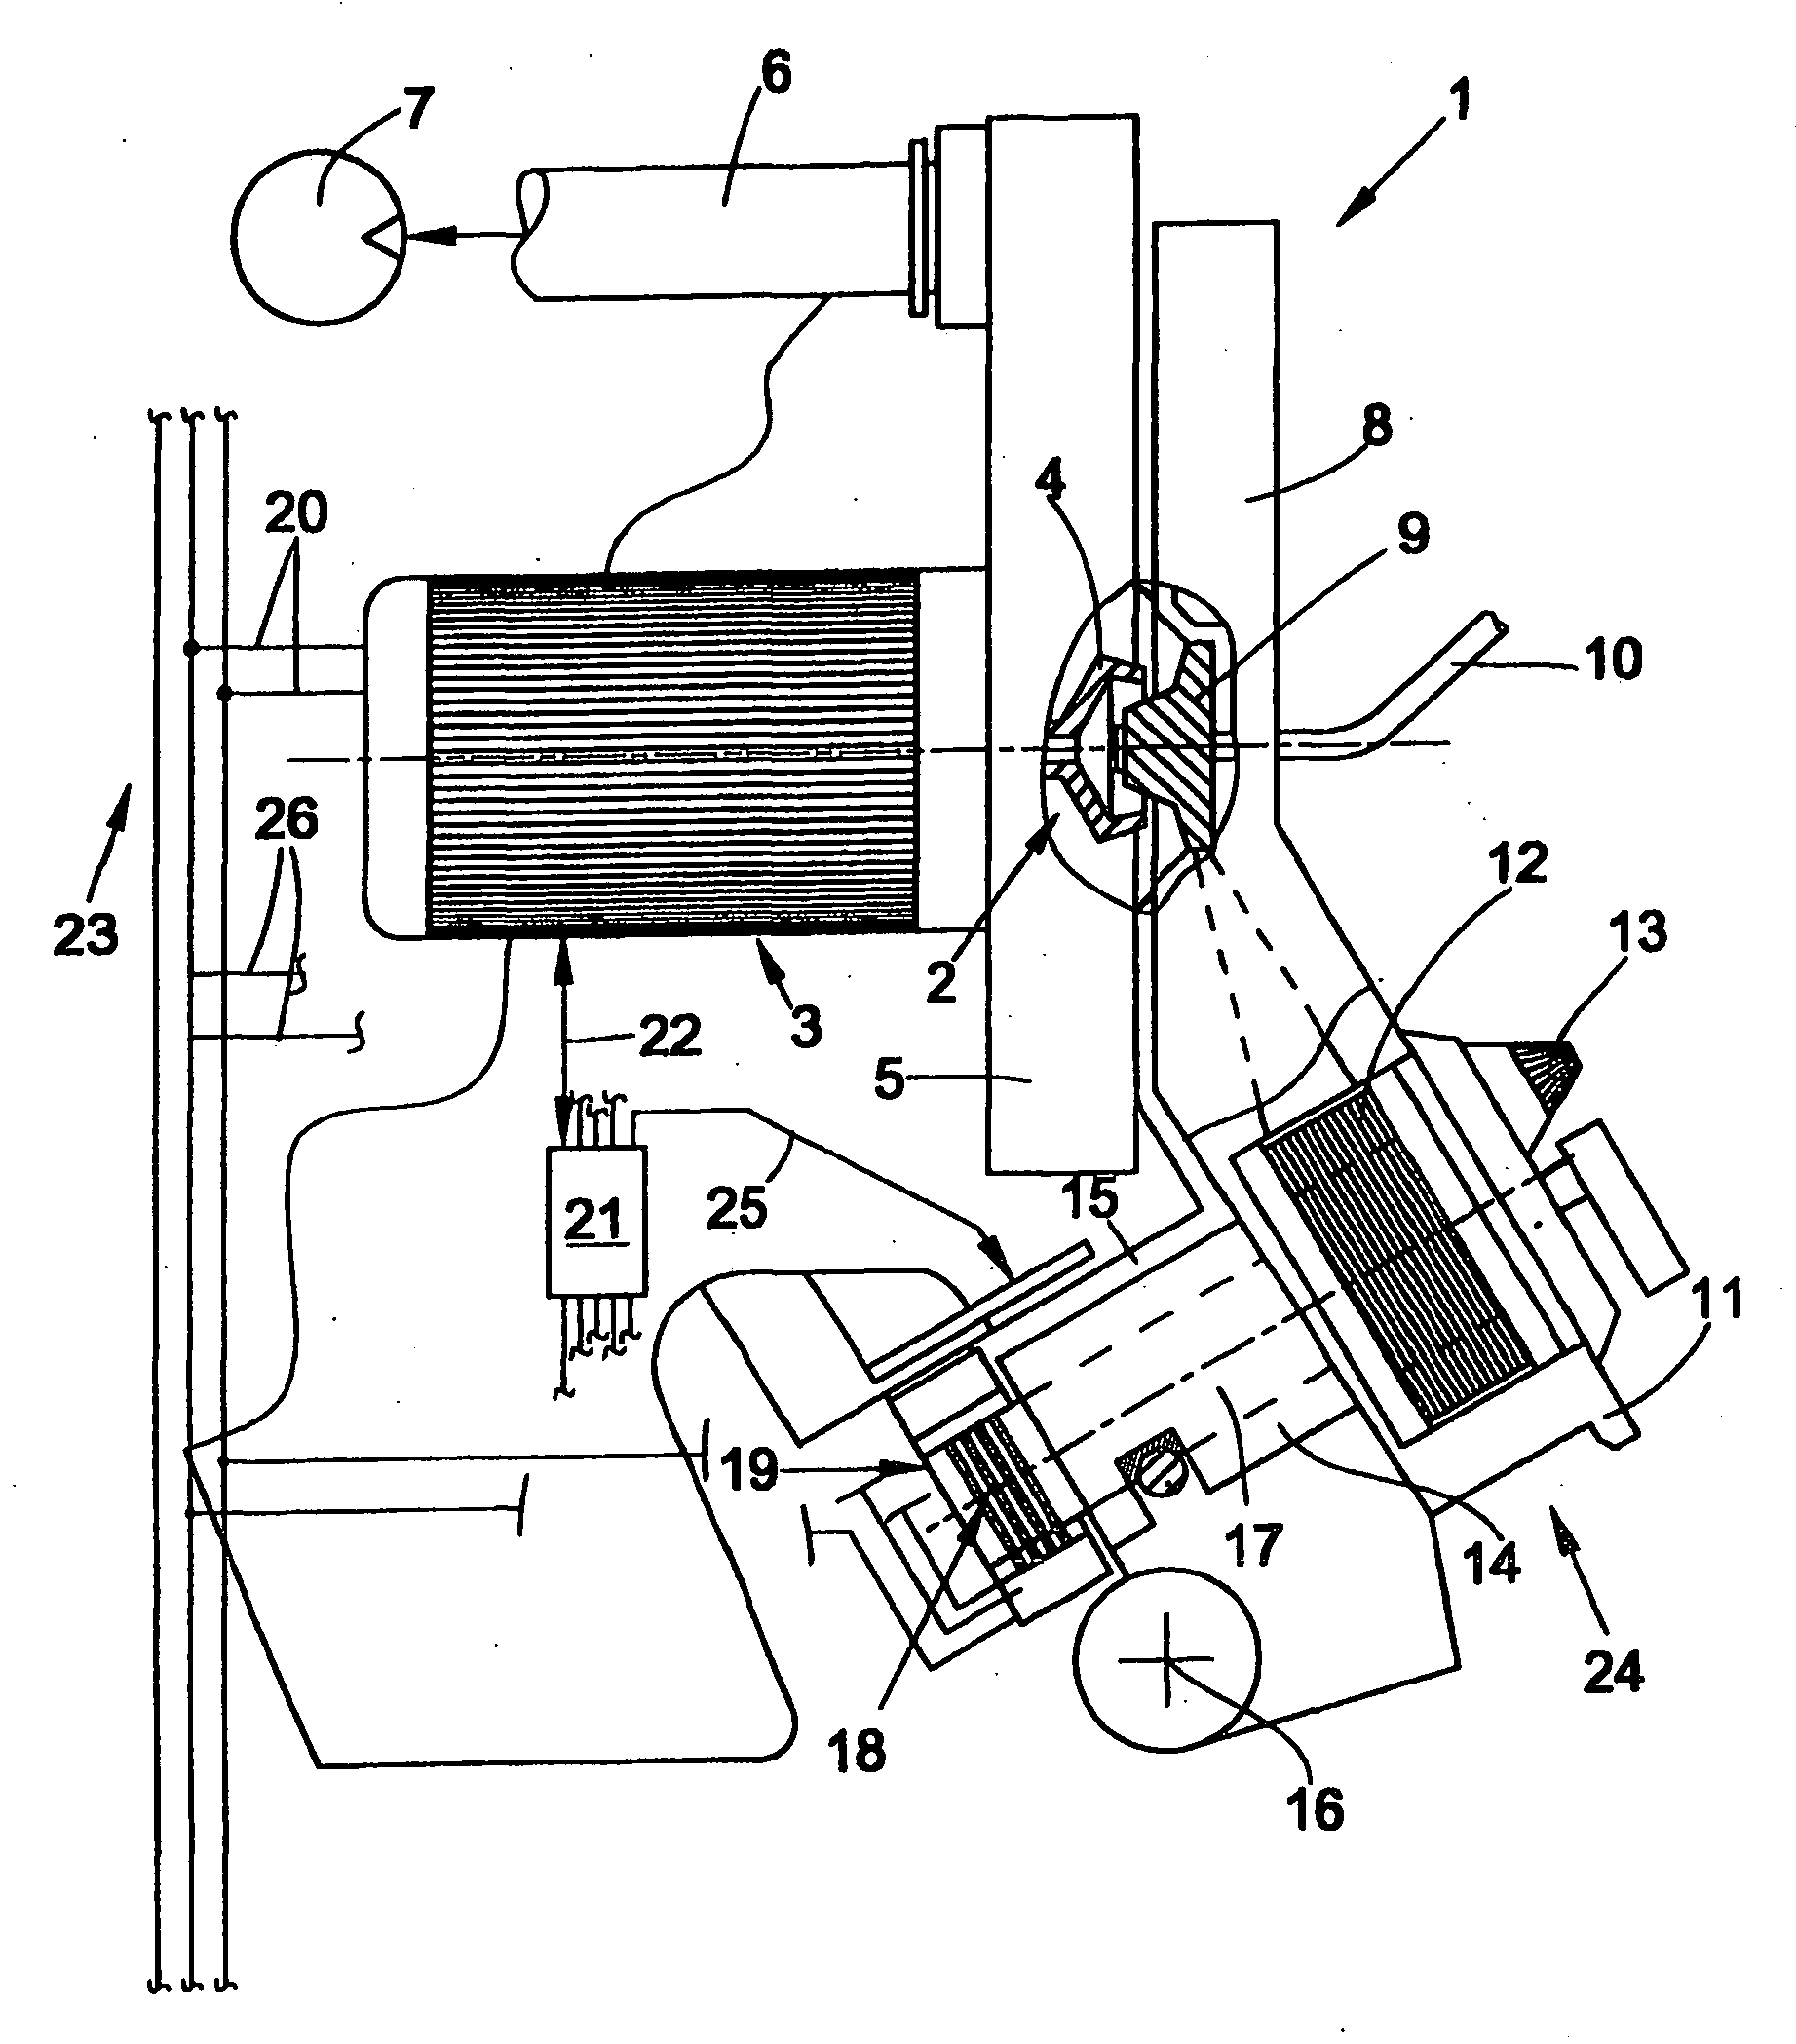 Method for Operating an Open-End Spinning Device